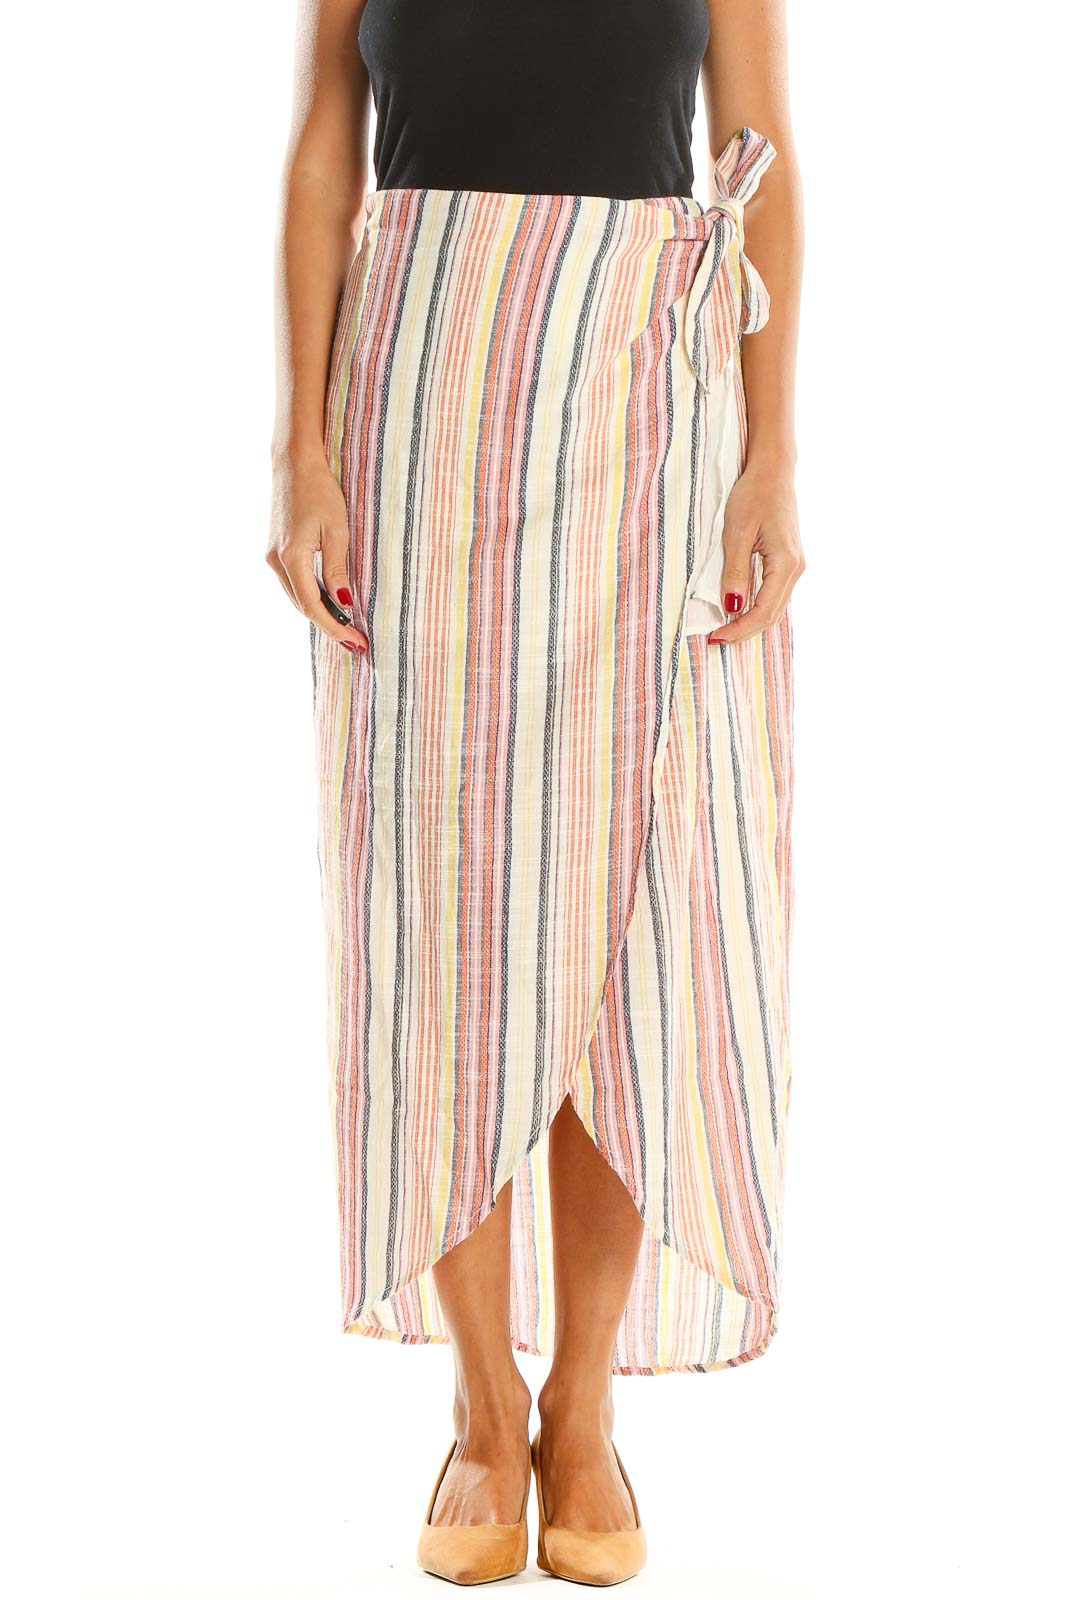 Multicolor Striped Bohemian Wrap Skirt Front